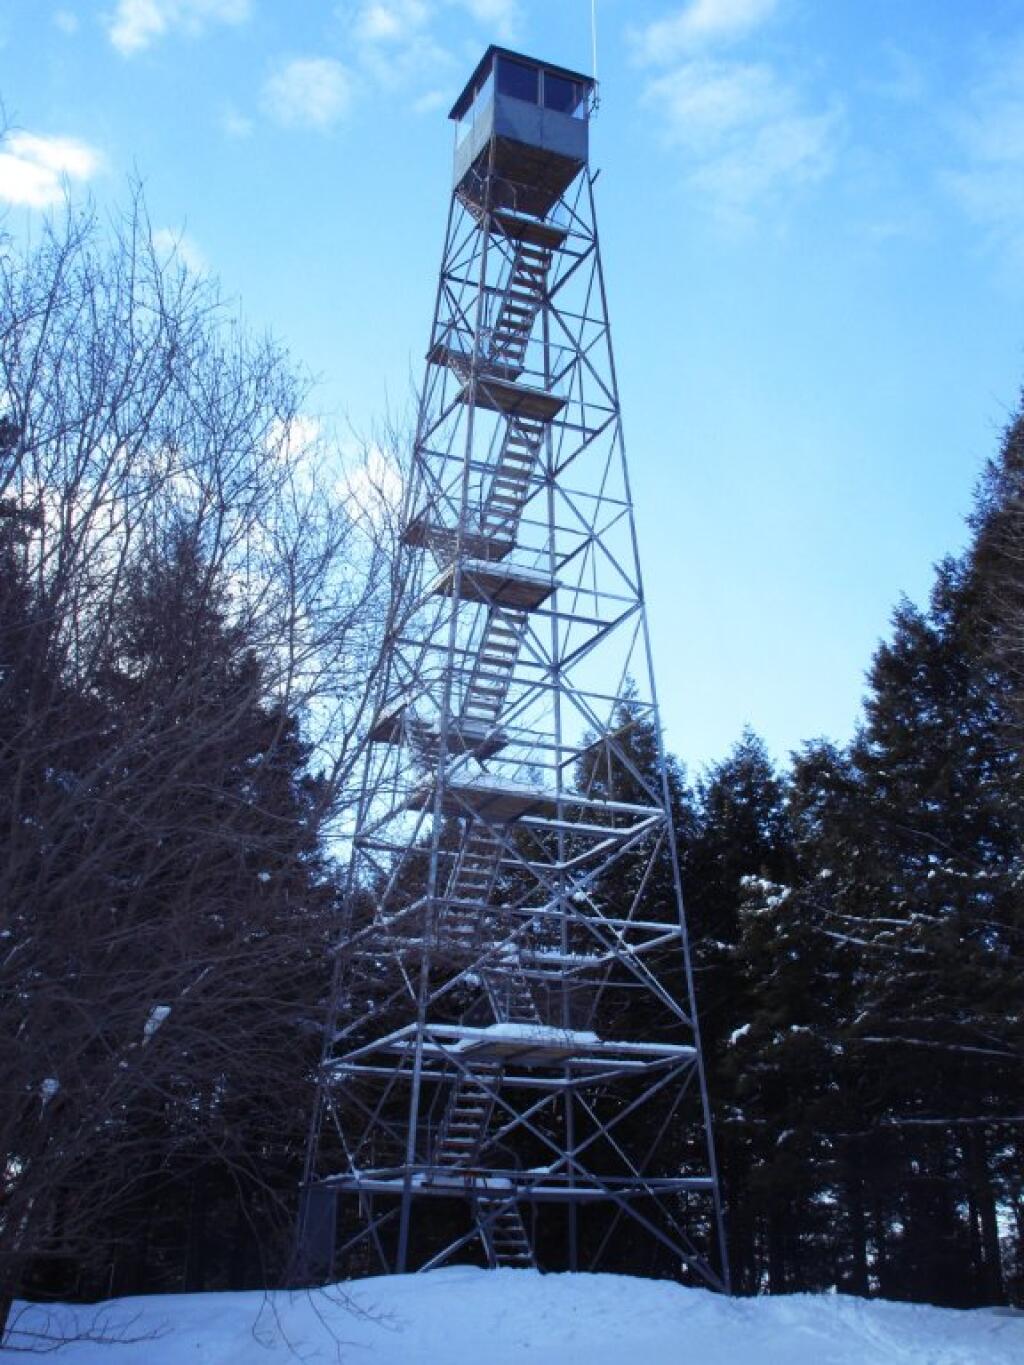  Spruce Mountain Fire Tower